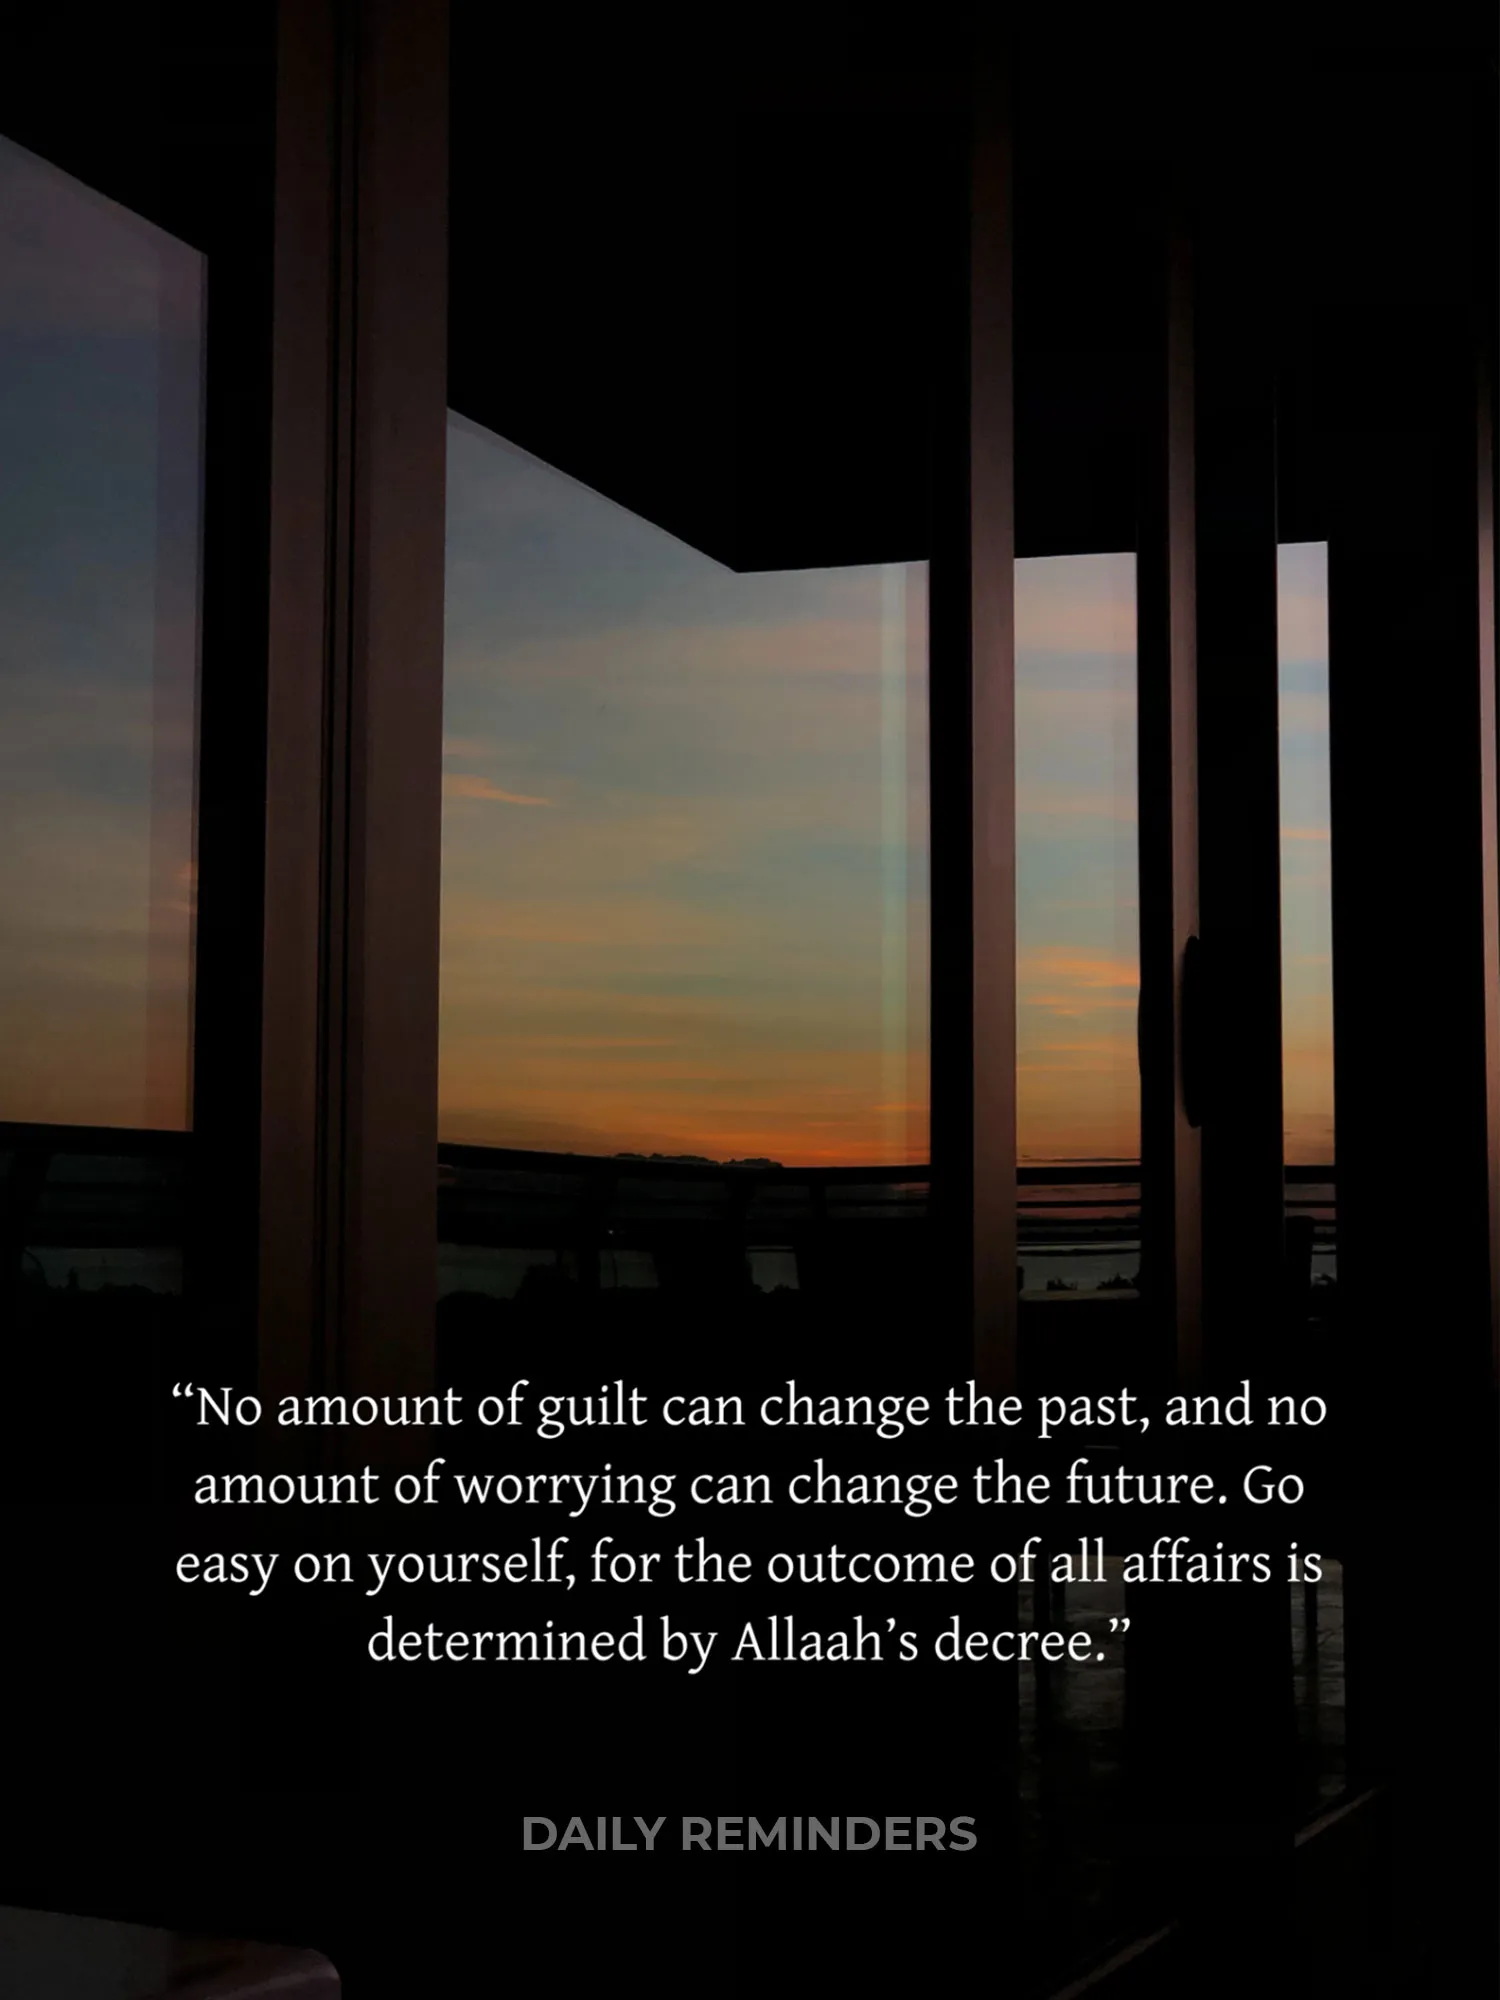 Islamic quotes and wallpapers Daily Reminders